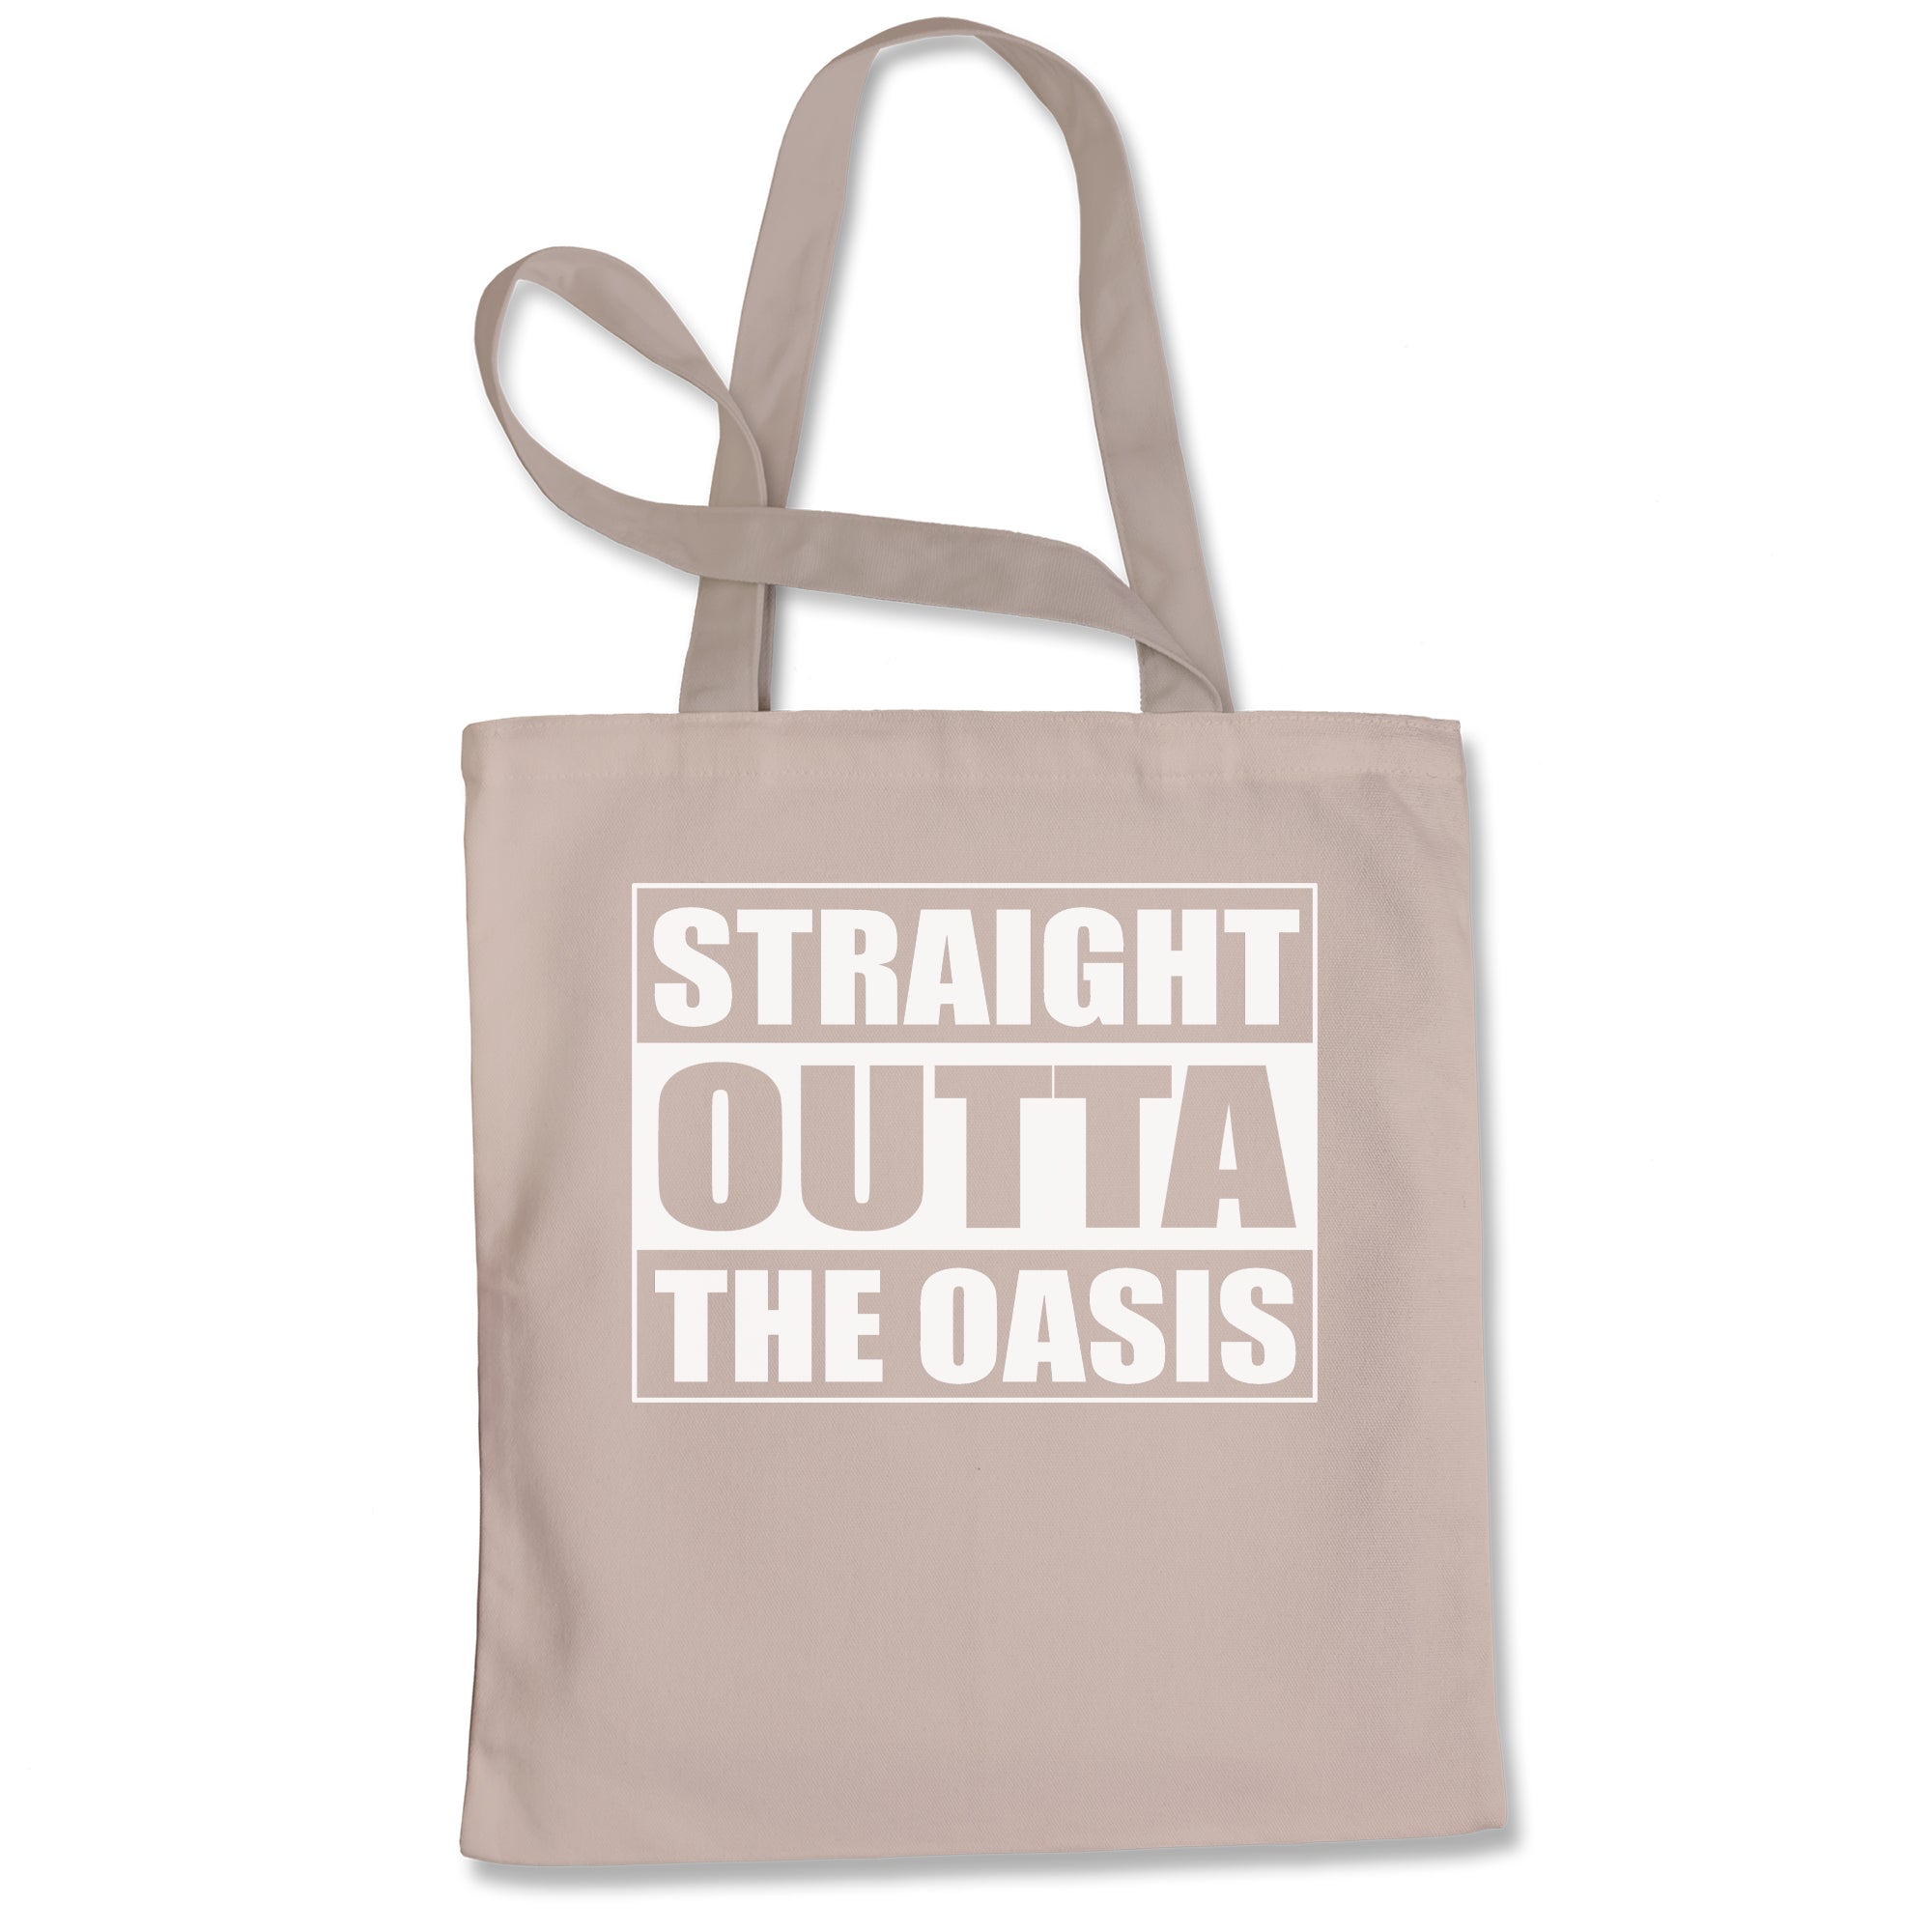 Striaght Outta The Oasis player one ready Tote Bag